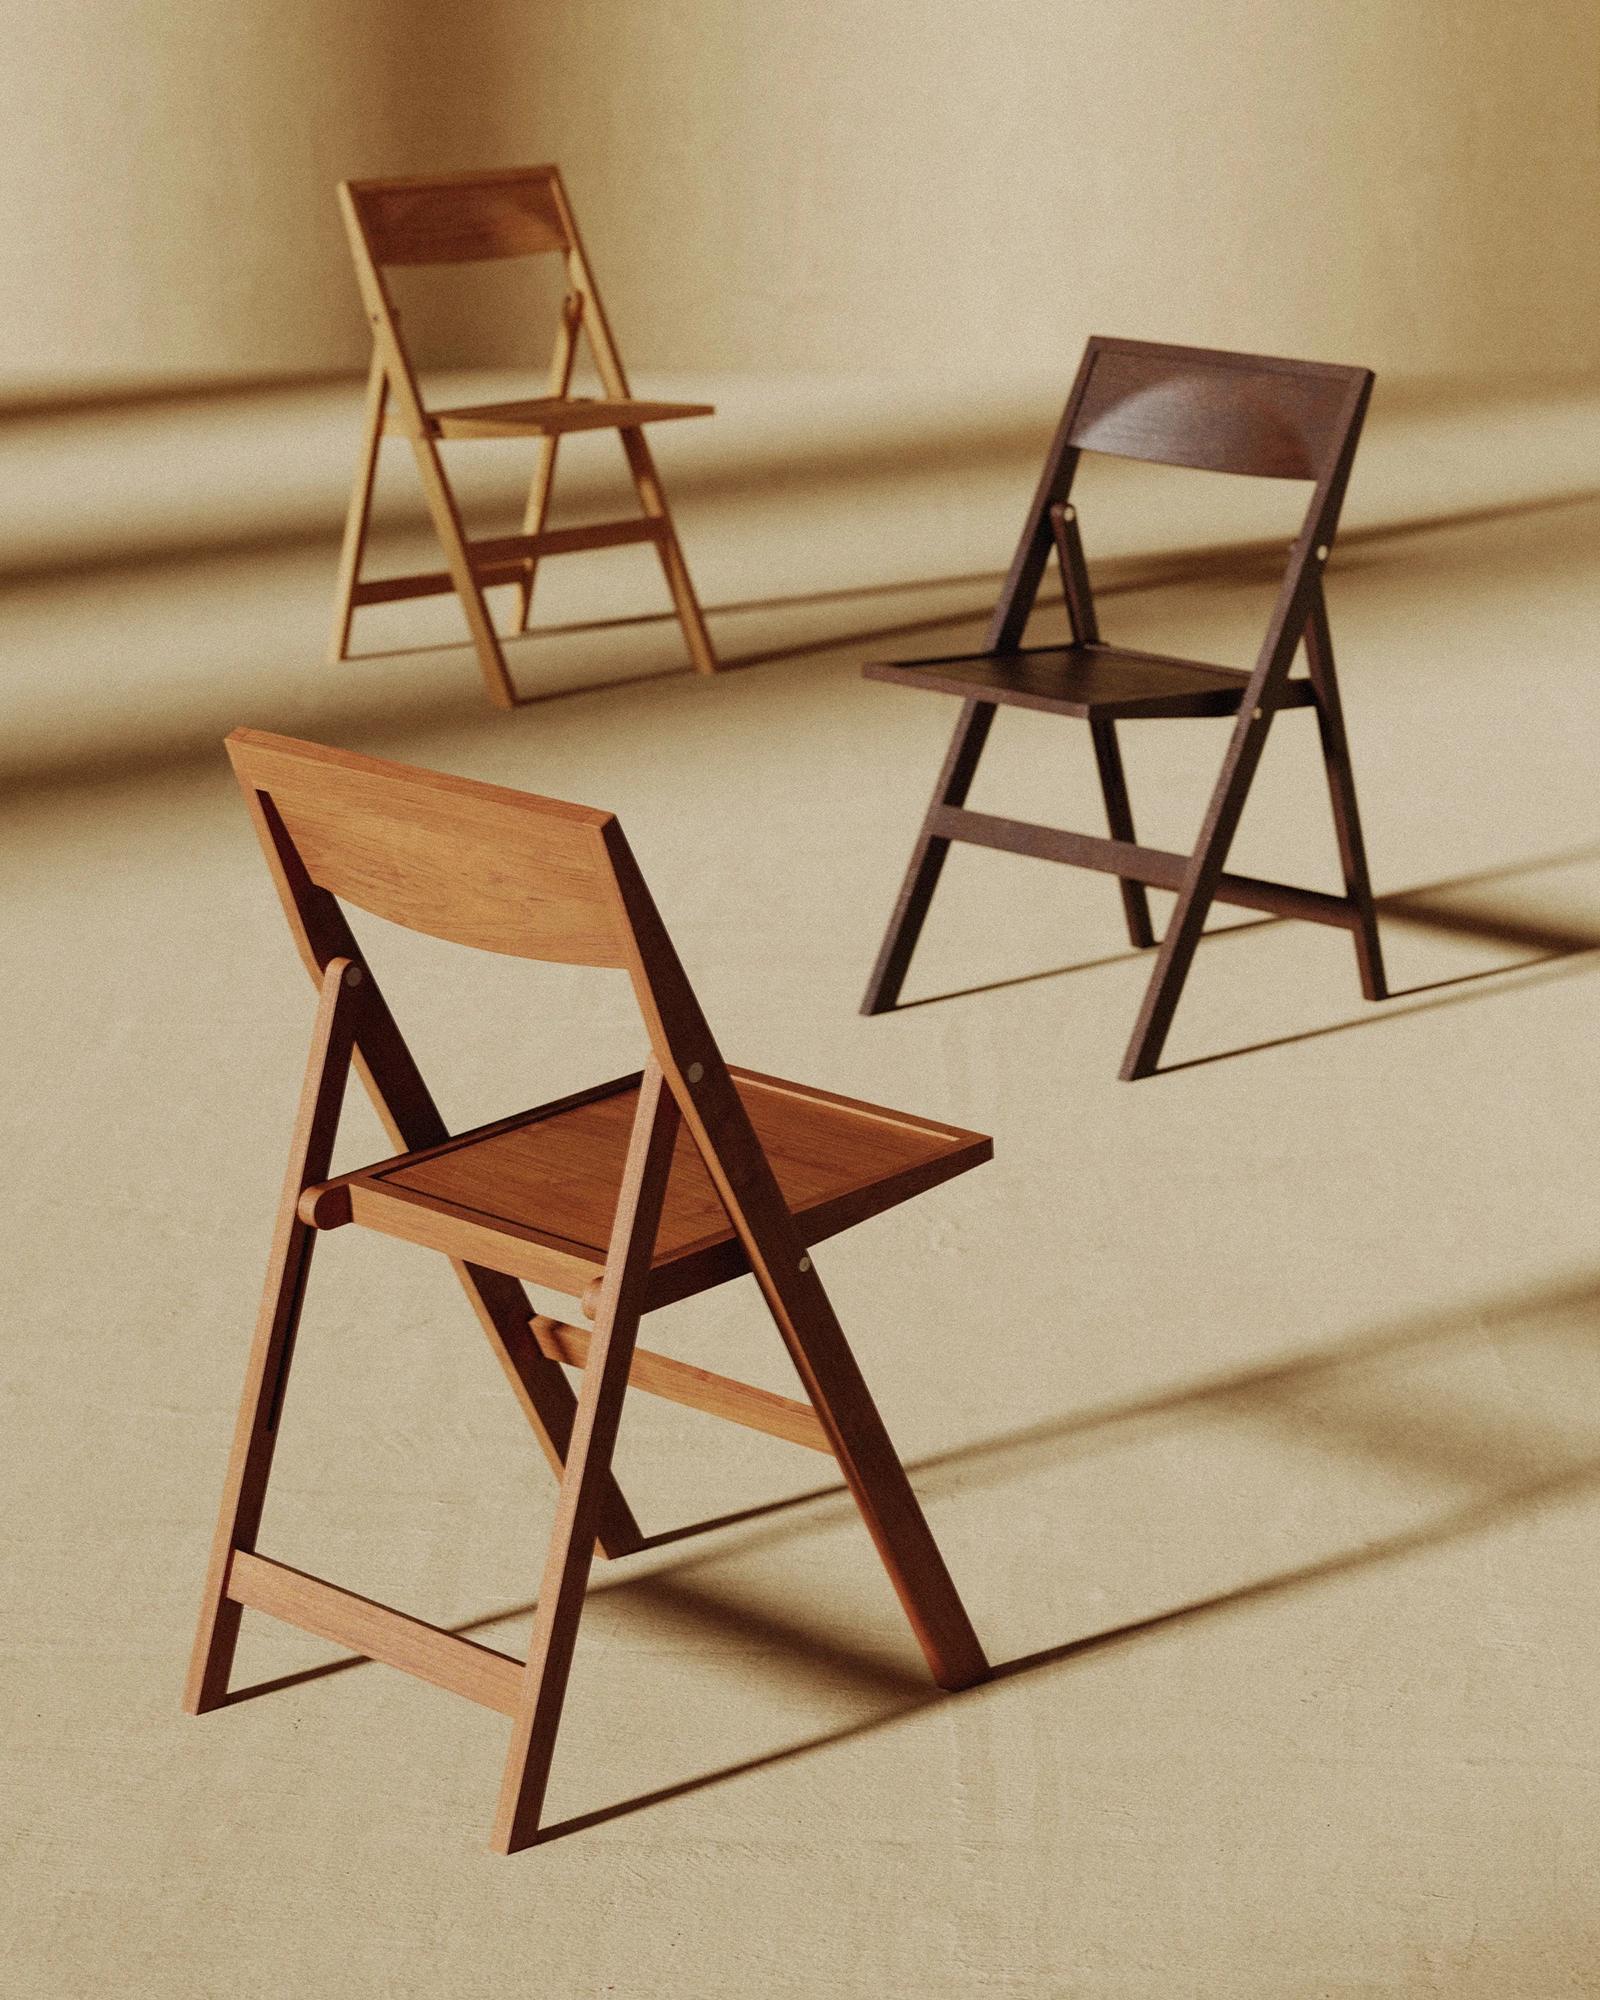 Frama folding chair in 3 finishes